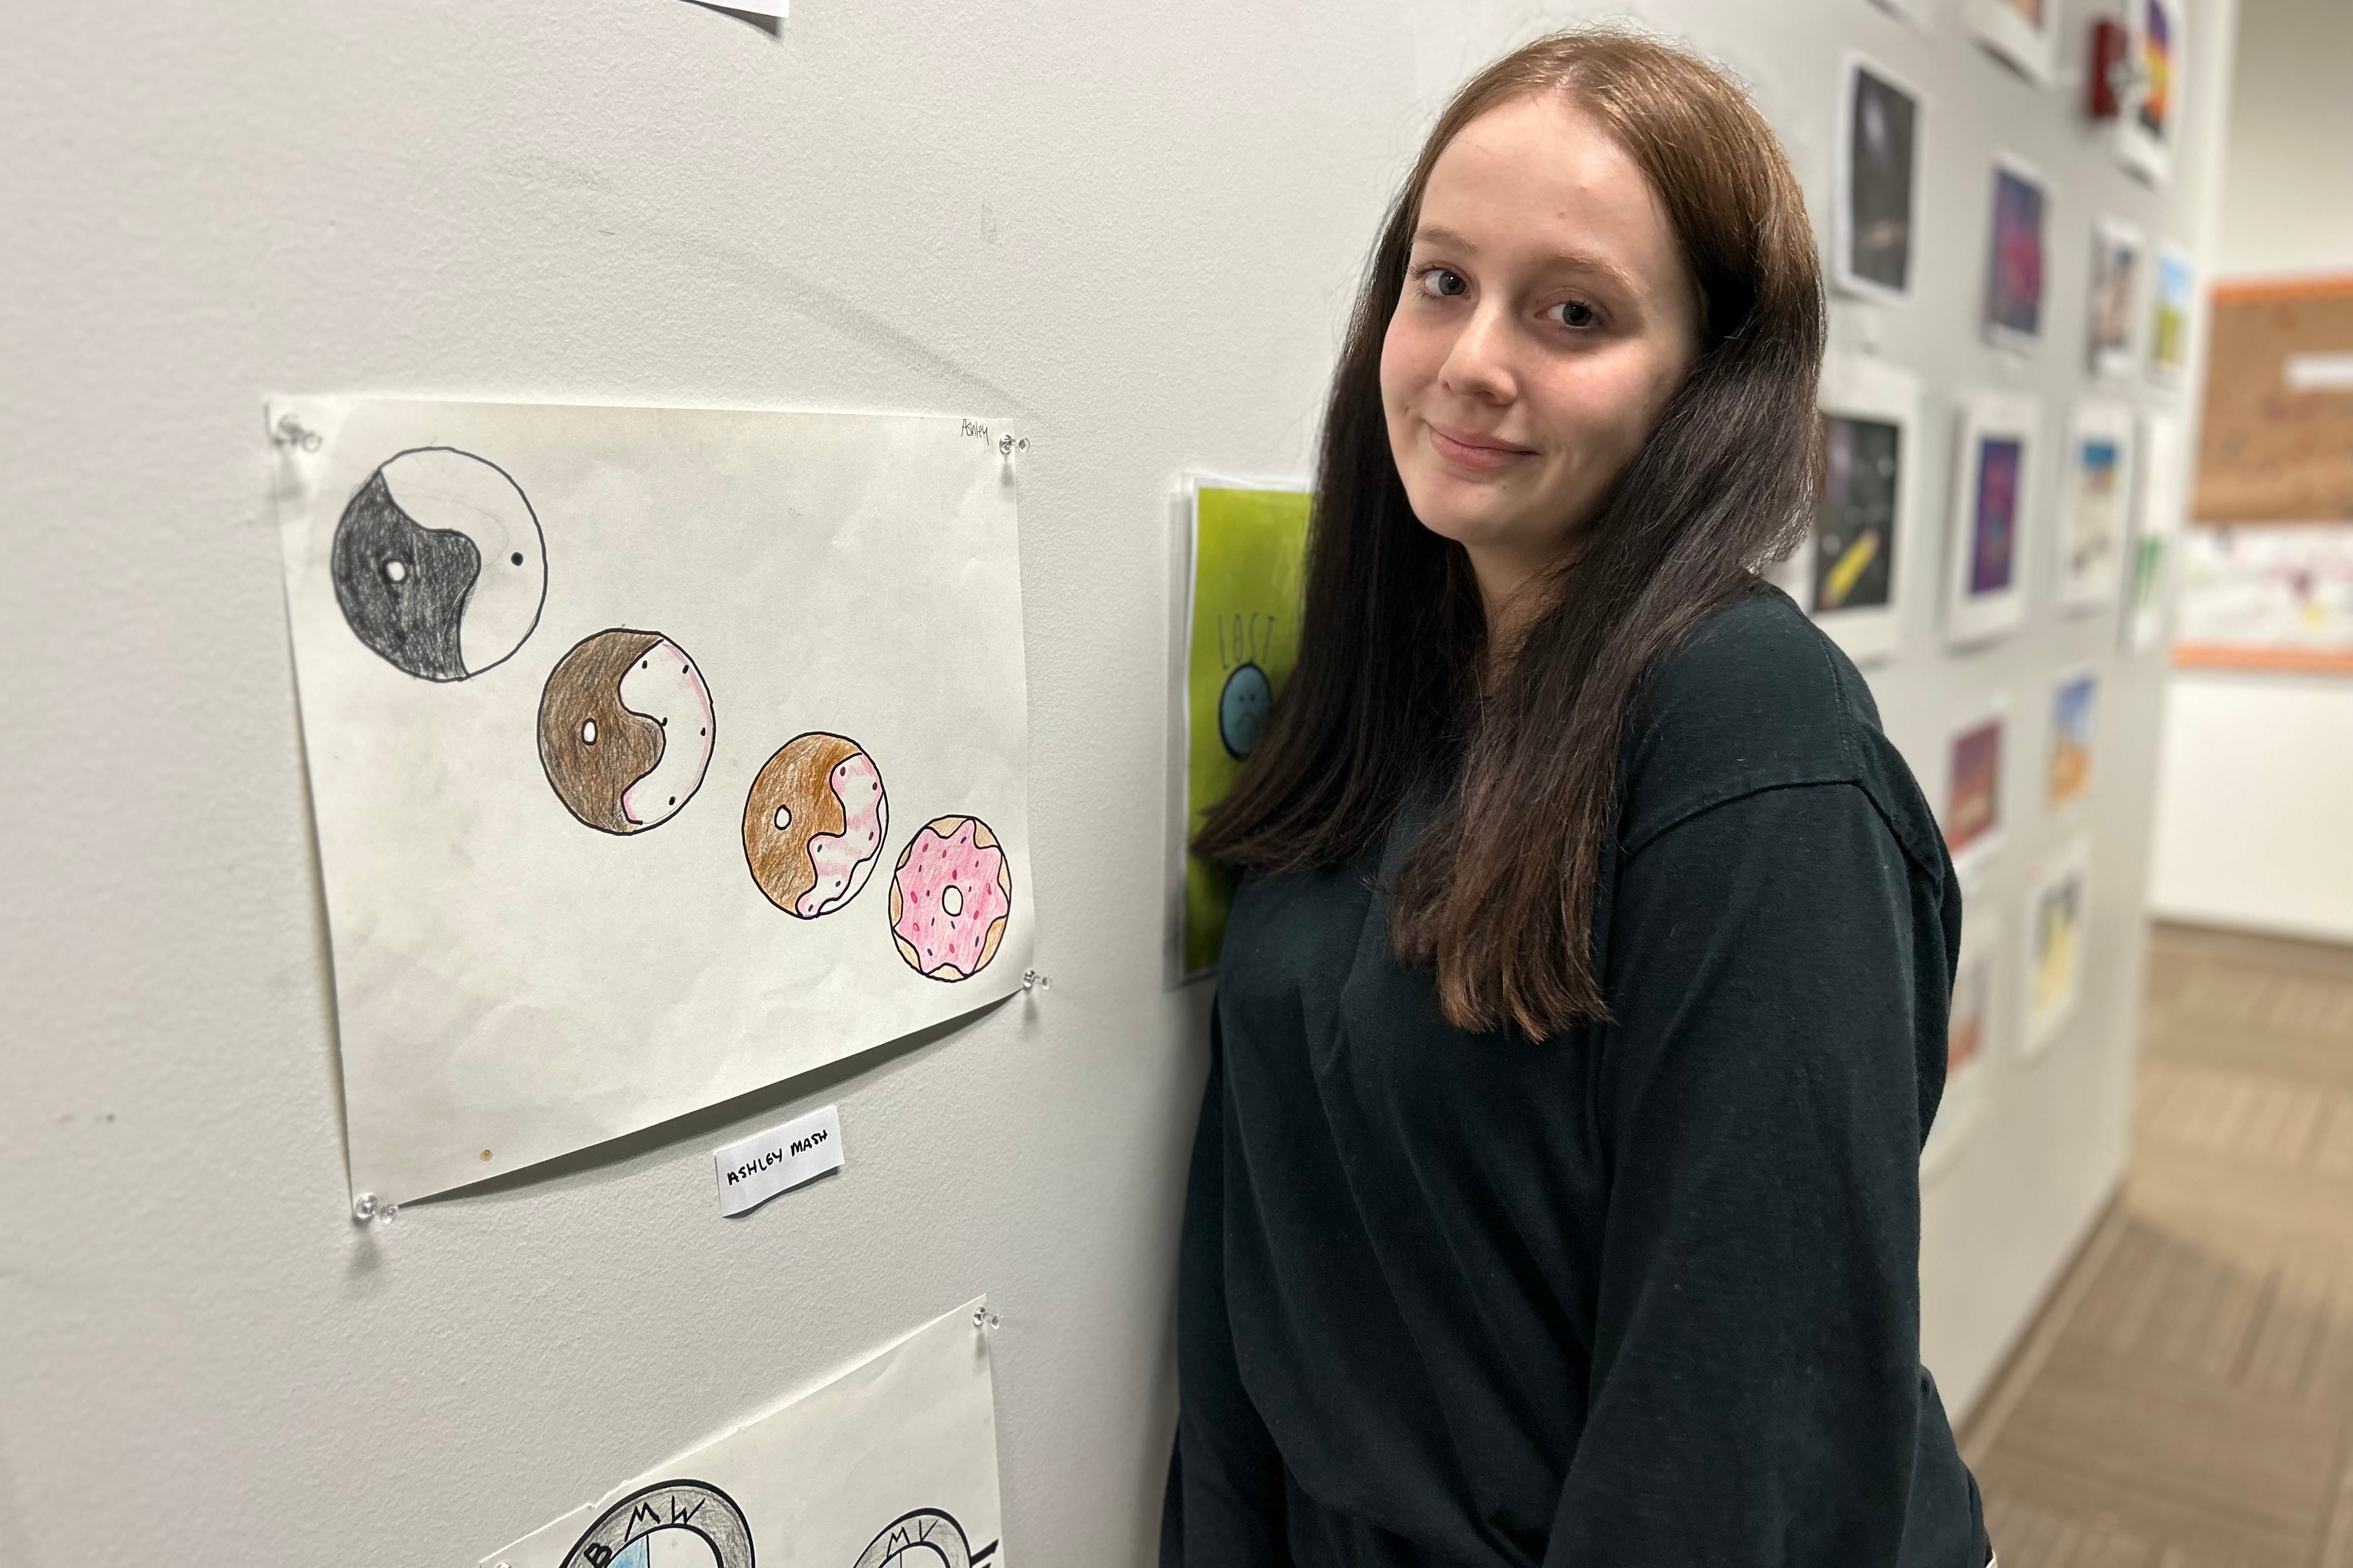 A student stands smiling in front of artwork she made.